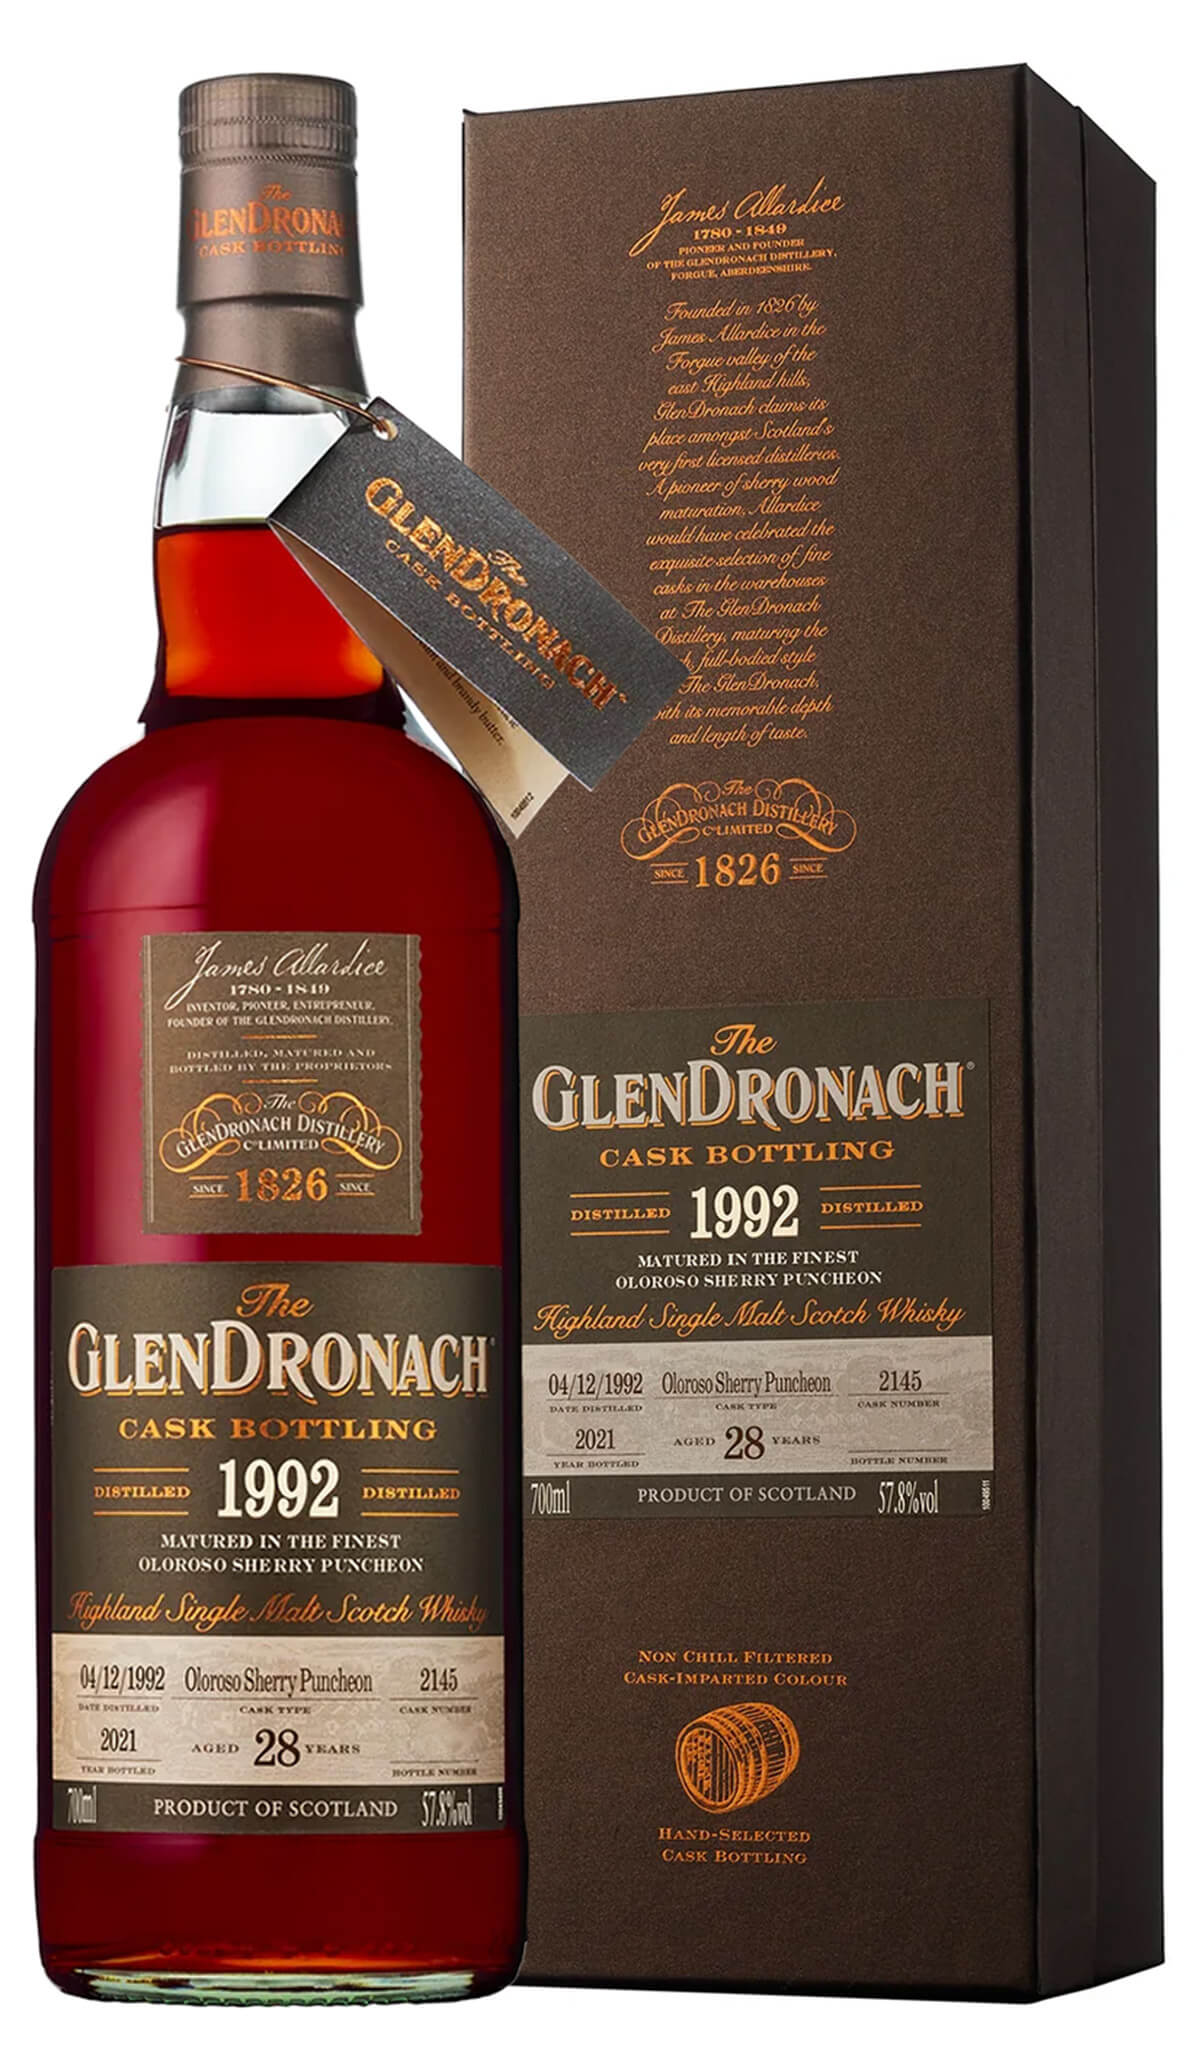 Find out more, explore the range and buy The Glendronach 1992 Single Cask 28 Year Old Cask 2145 Single Malt Scotch Whisky 700mL available online at Wine Sellers Direct - Australia's independent liquor specialists.